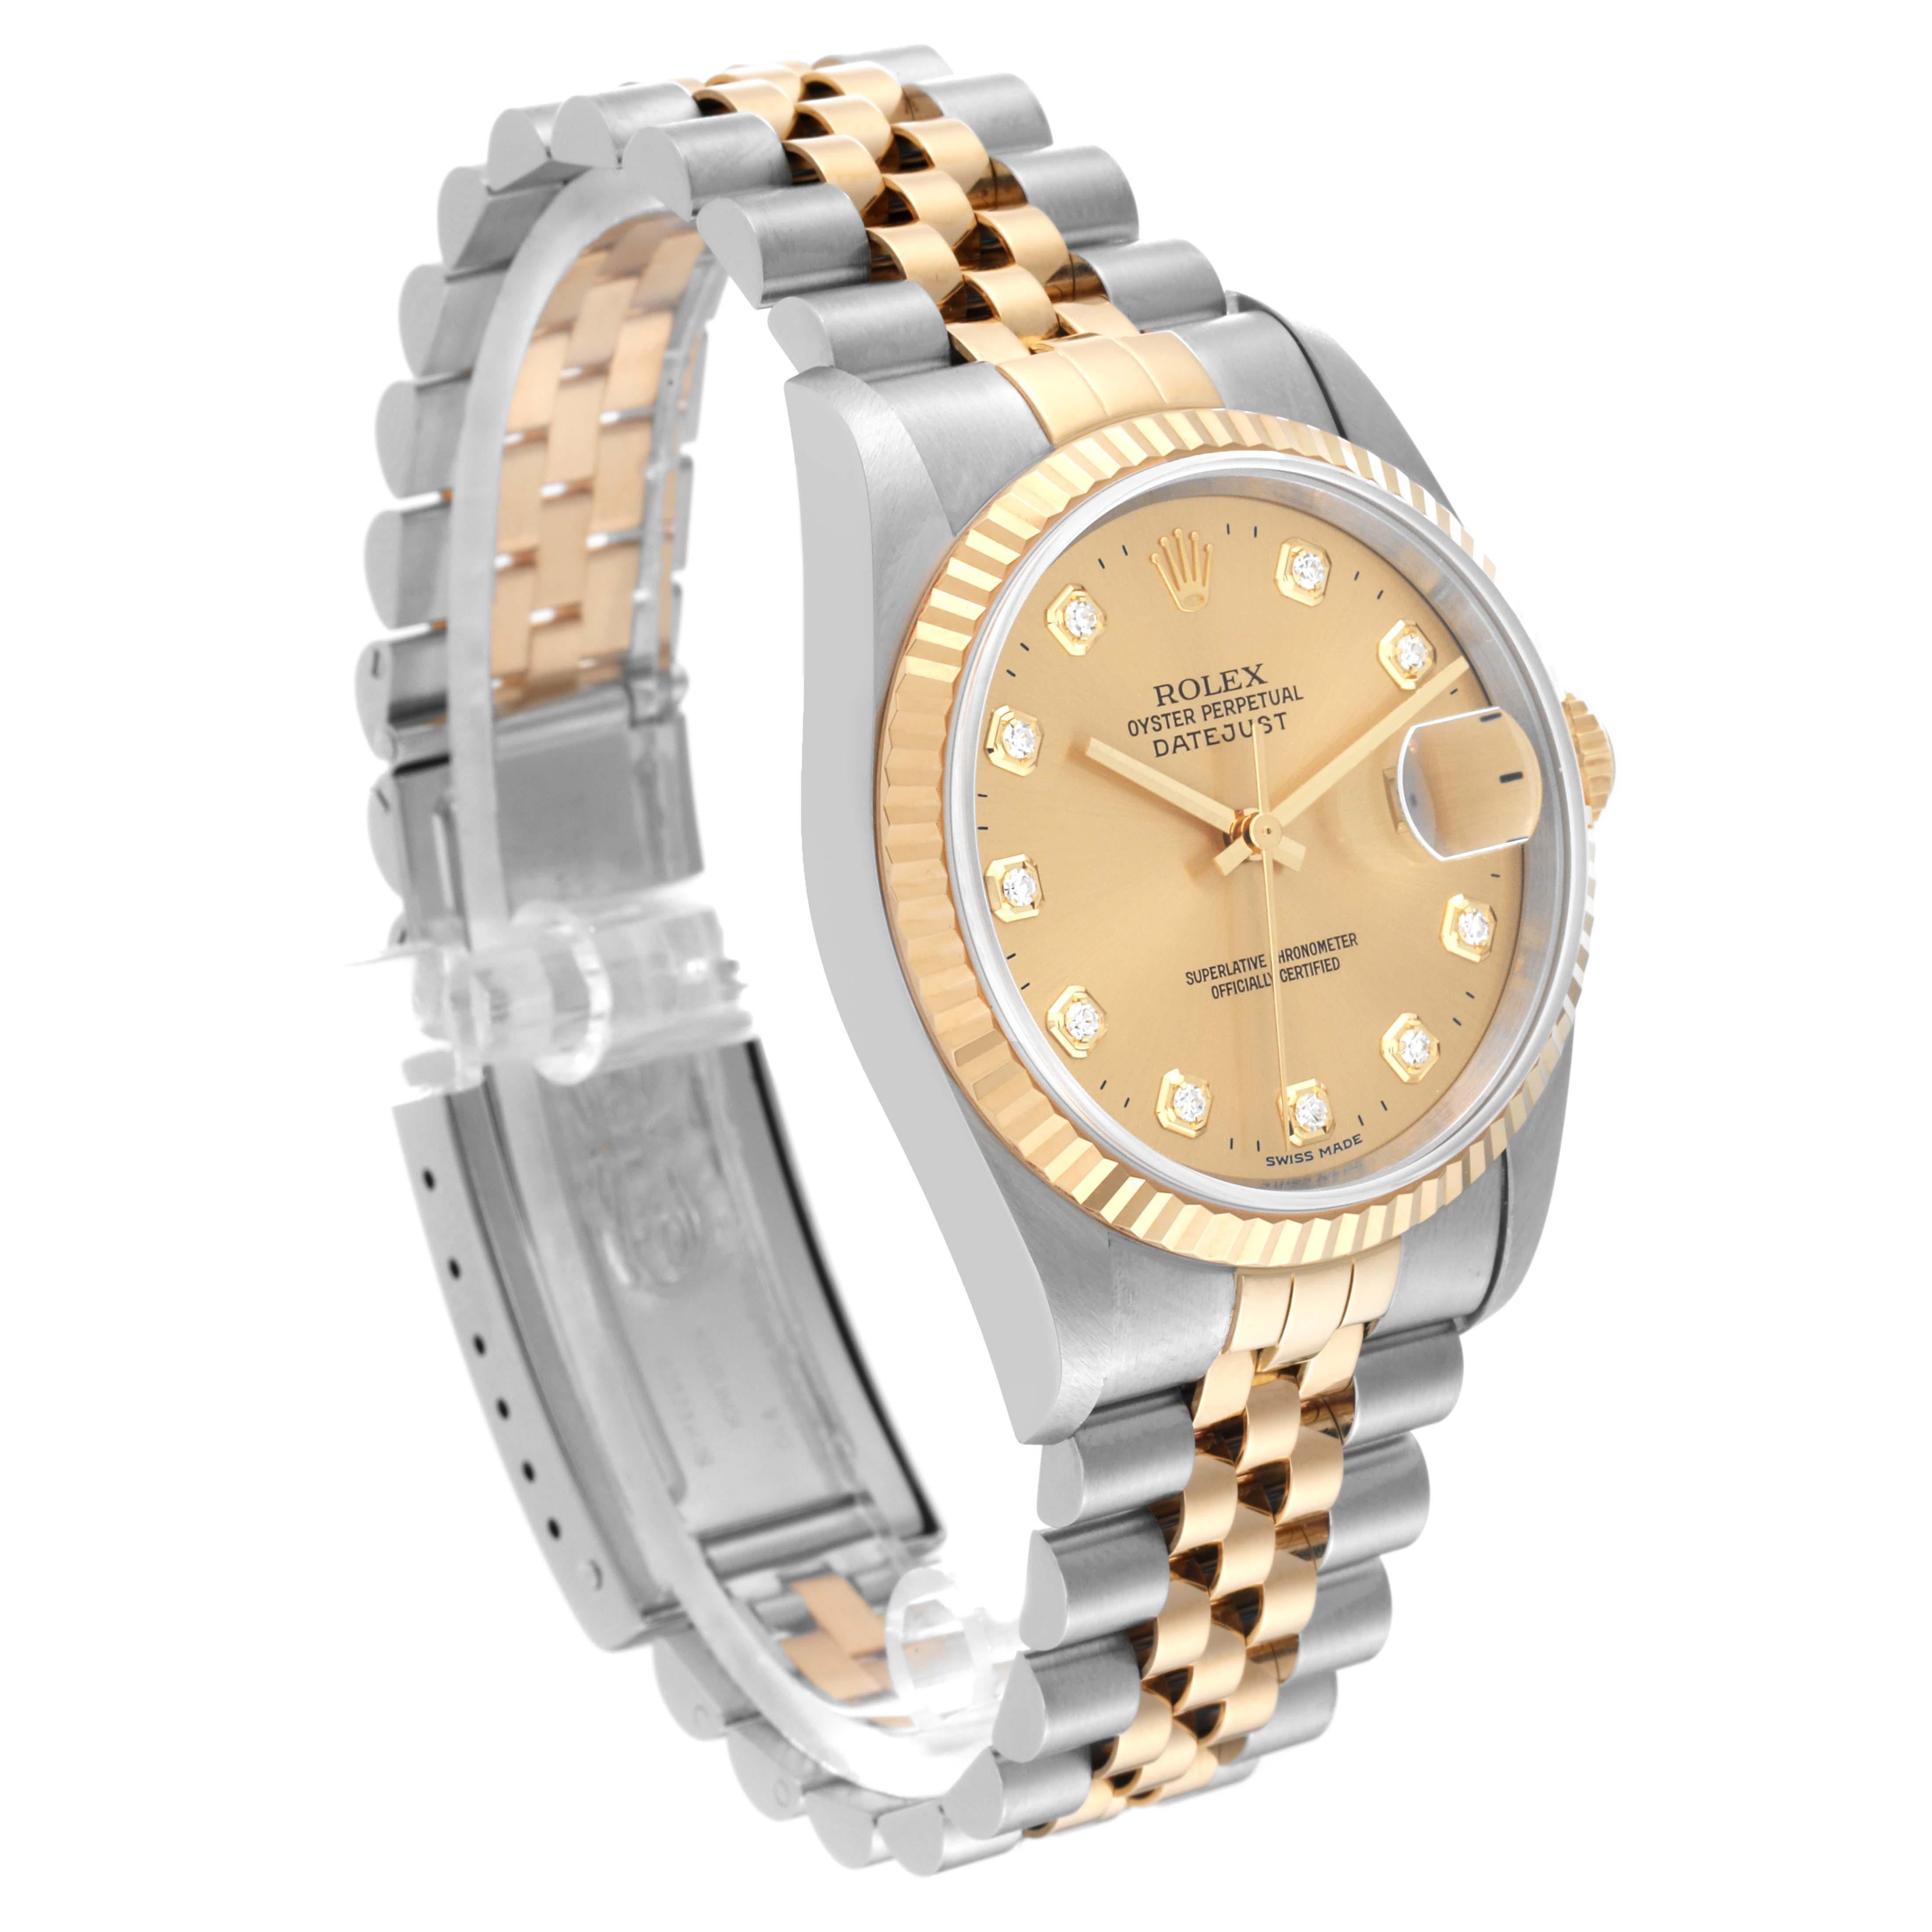 Rolex Datejust Diamond Dial Steel Yellow Gold Mens Watch 16233 Box Papers 2